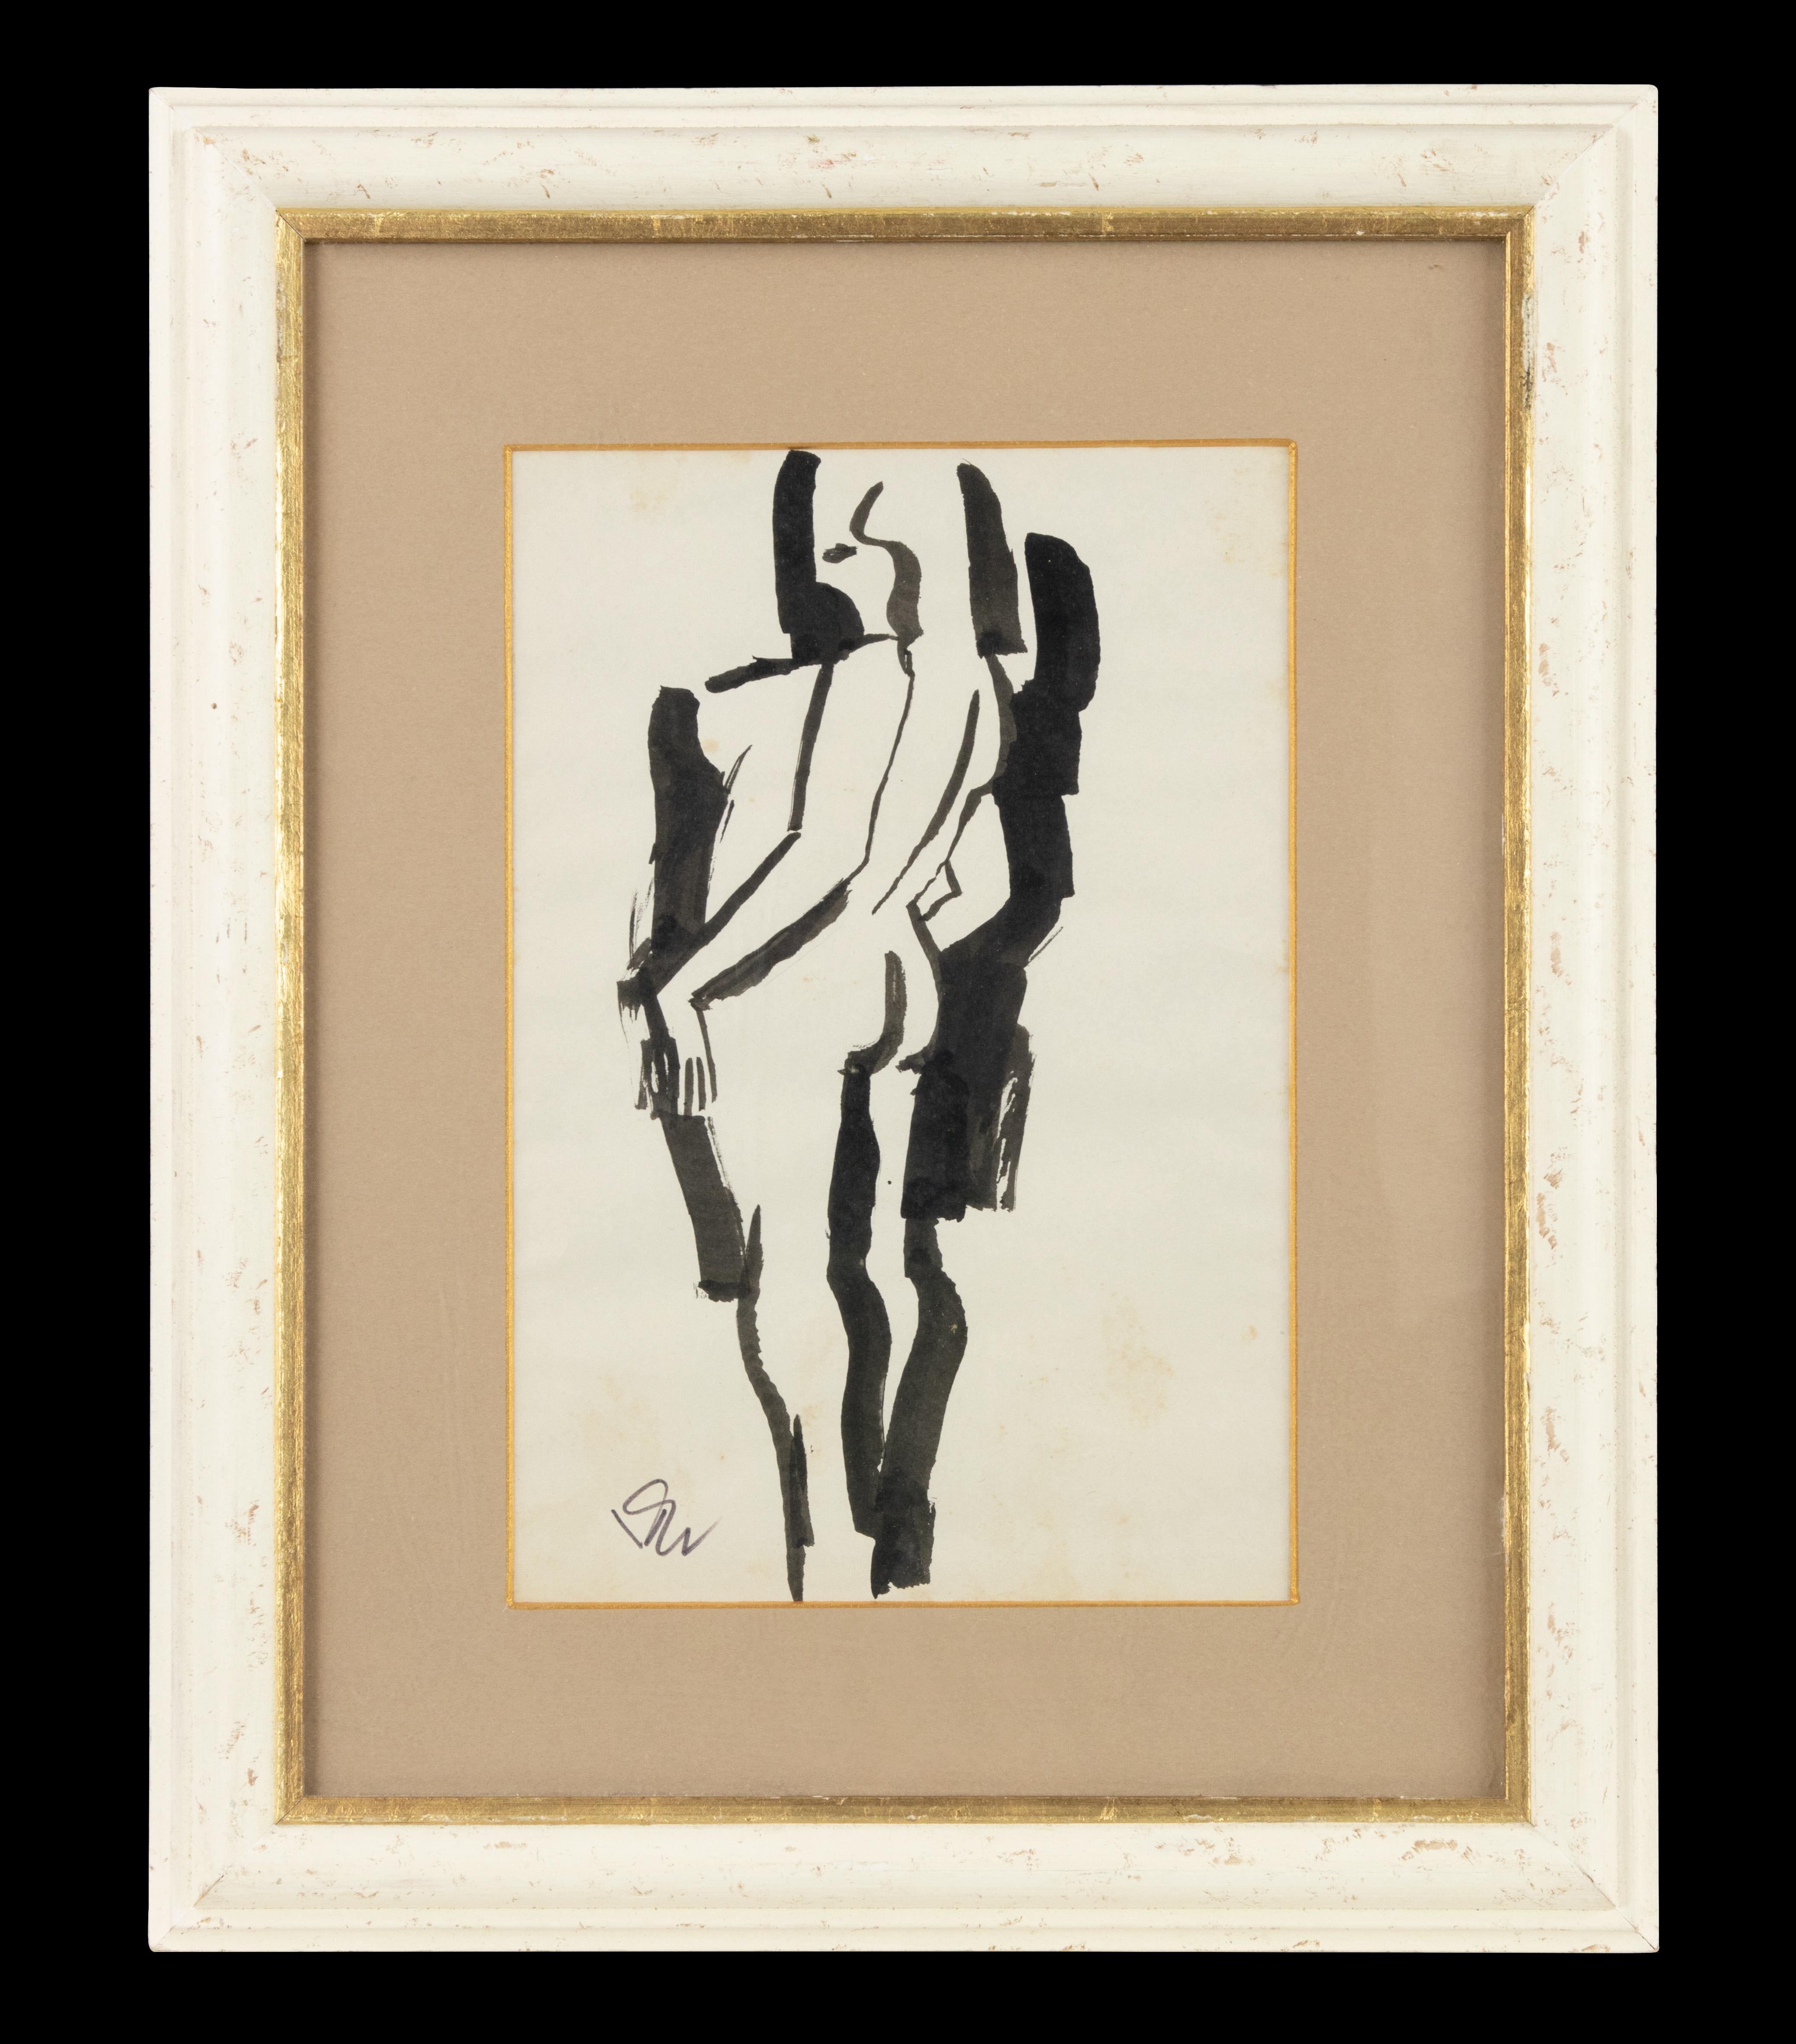 Untitled is a modern artwork realized by Remo Brindisi in 1970s

Black and white china ink drawing.

Hand signed on the lower margin.

Includes frame: 96 x 1.5 x 75 cm